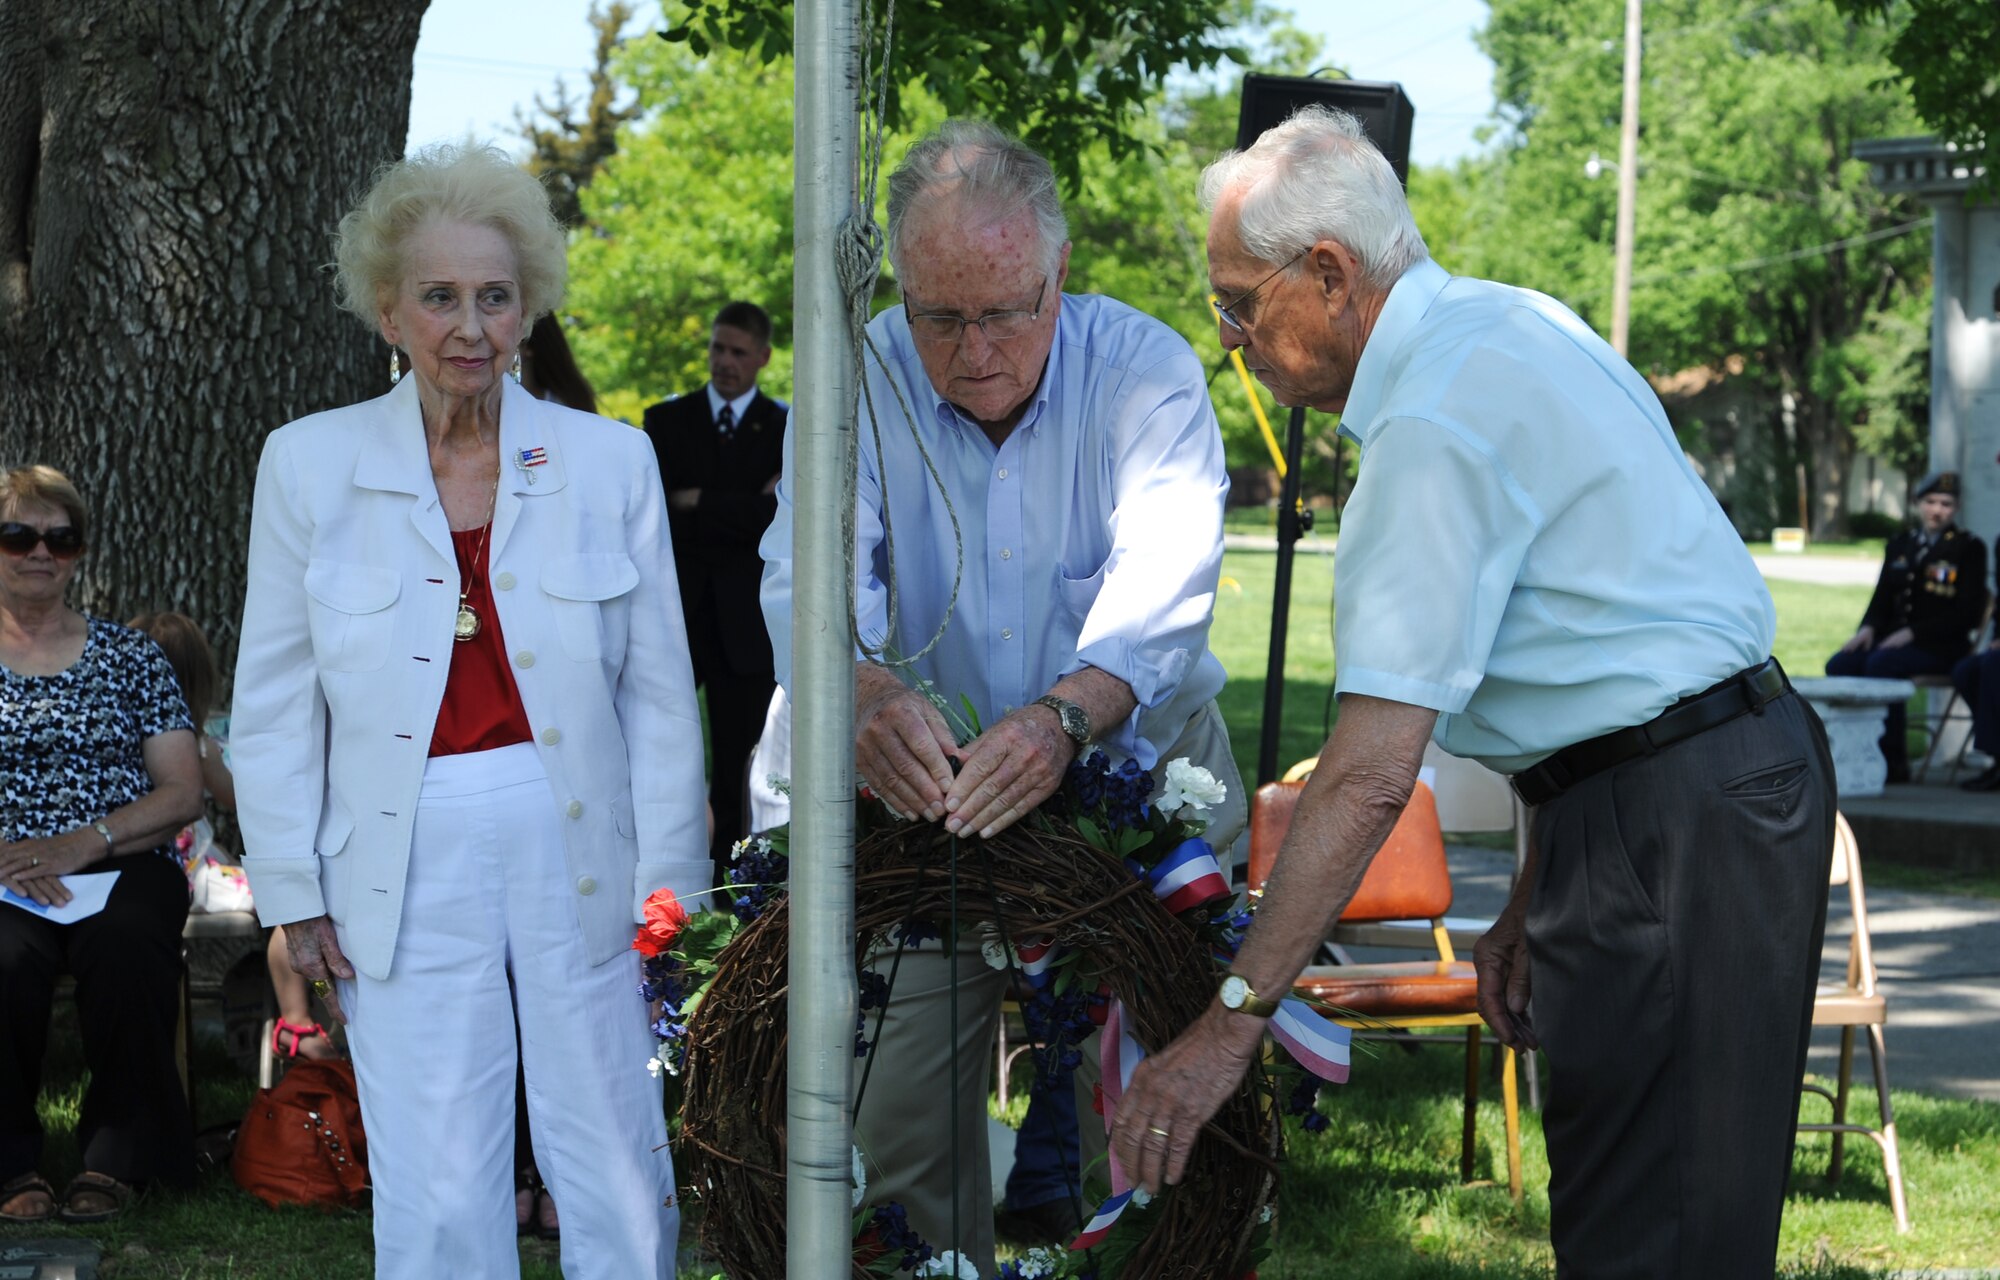 Eva Myers, James Callis and John Rucker lay the wreath at 2nd Lt. George Whiteman’s graveside during an annual ceremony May 18, 2013, in Sedalia, Mo. All three of them were also present at the first wreath-laying ceremony 25 years ago. (U.S. Air Force photo by Senior Airman Brigitte N. Brantley/Released)